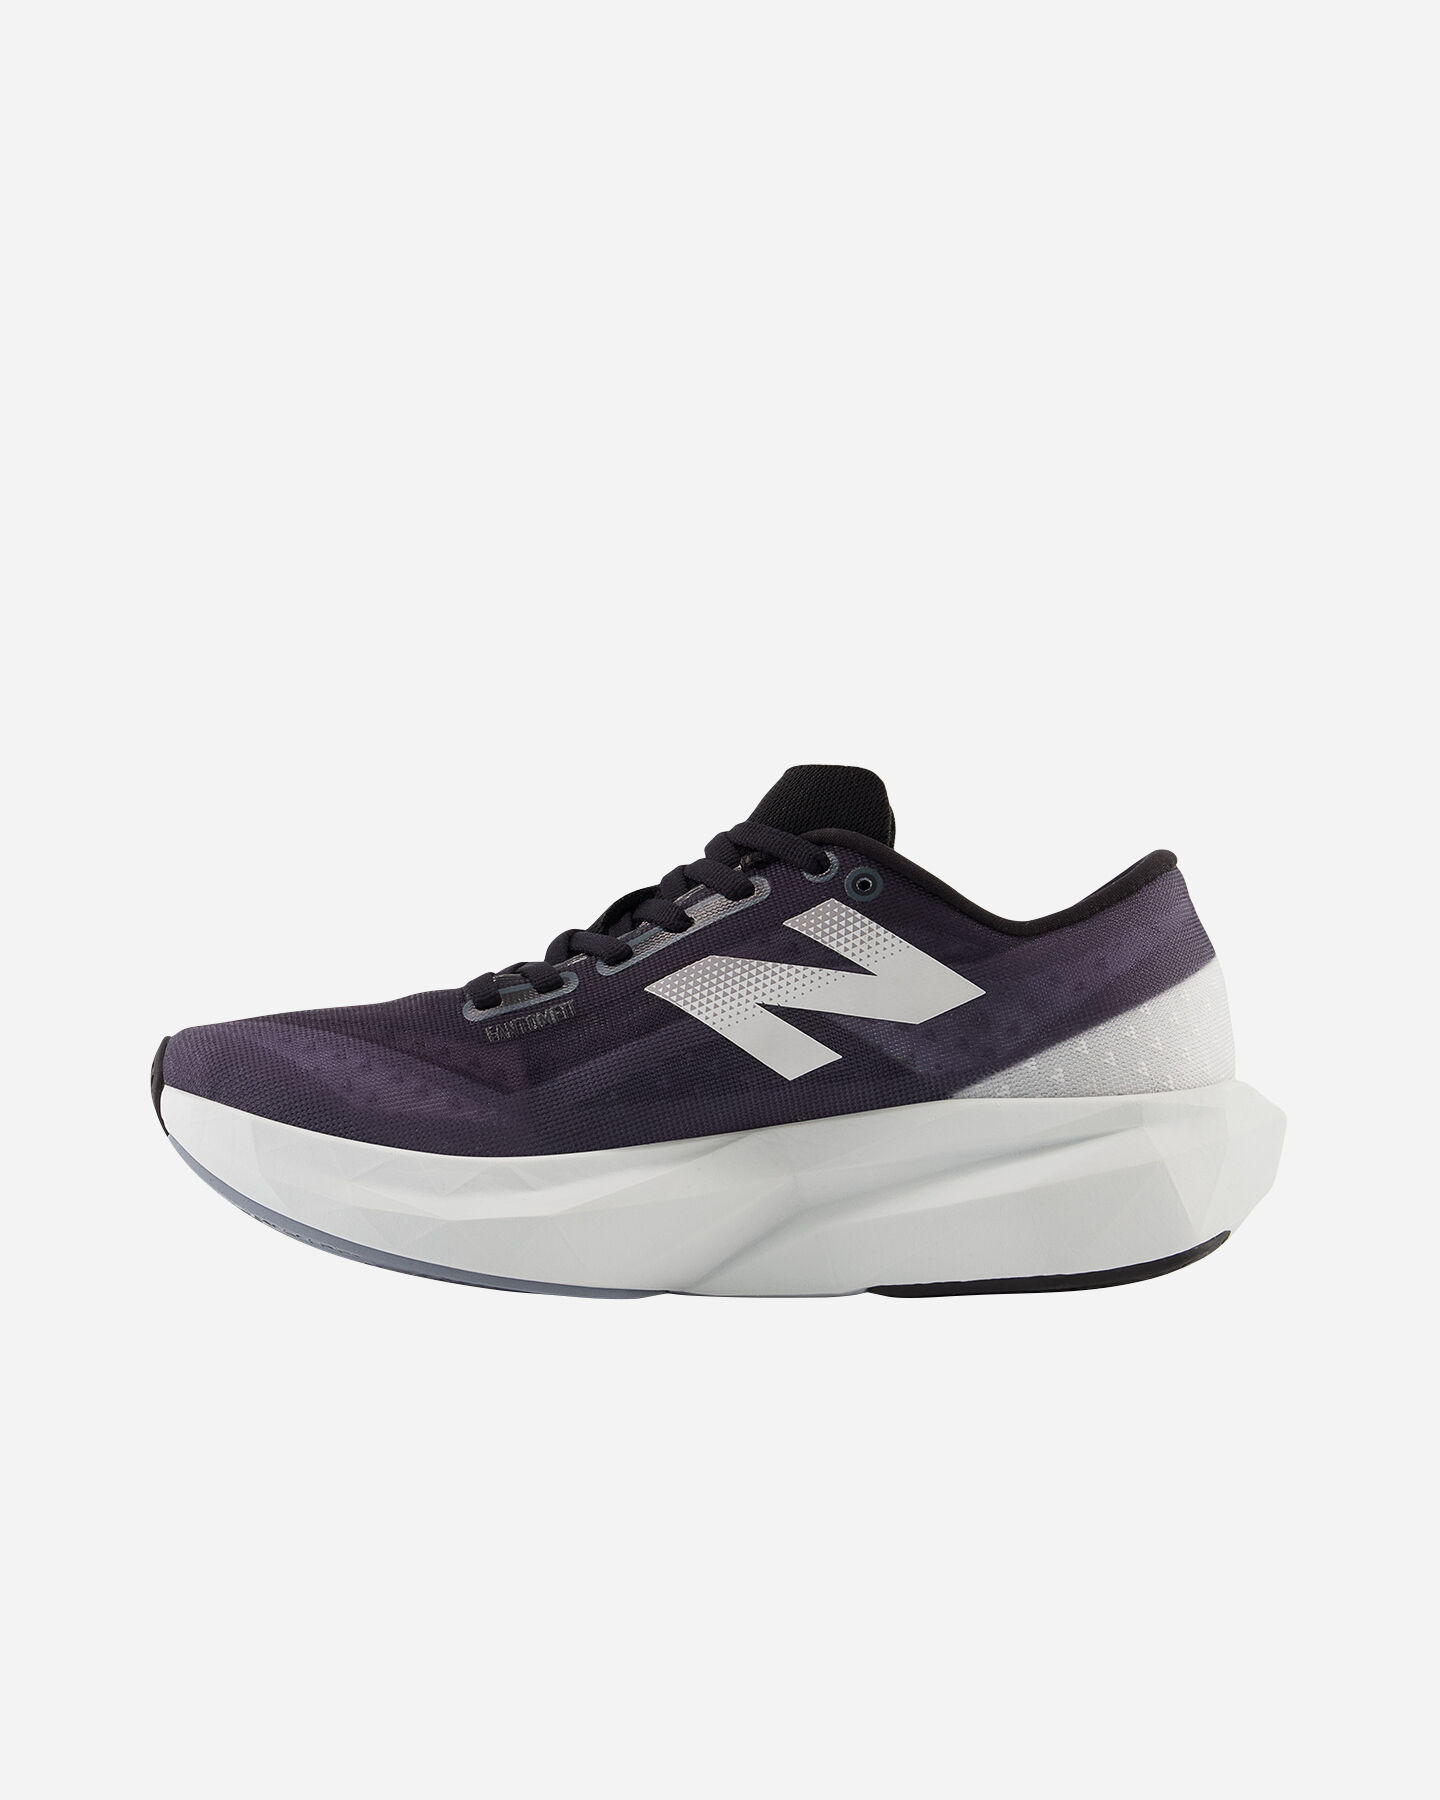  Scarpe running NEW BALANCE FUELCELL REBEL V4 W S5653001|-|B6 scatto 5